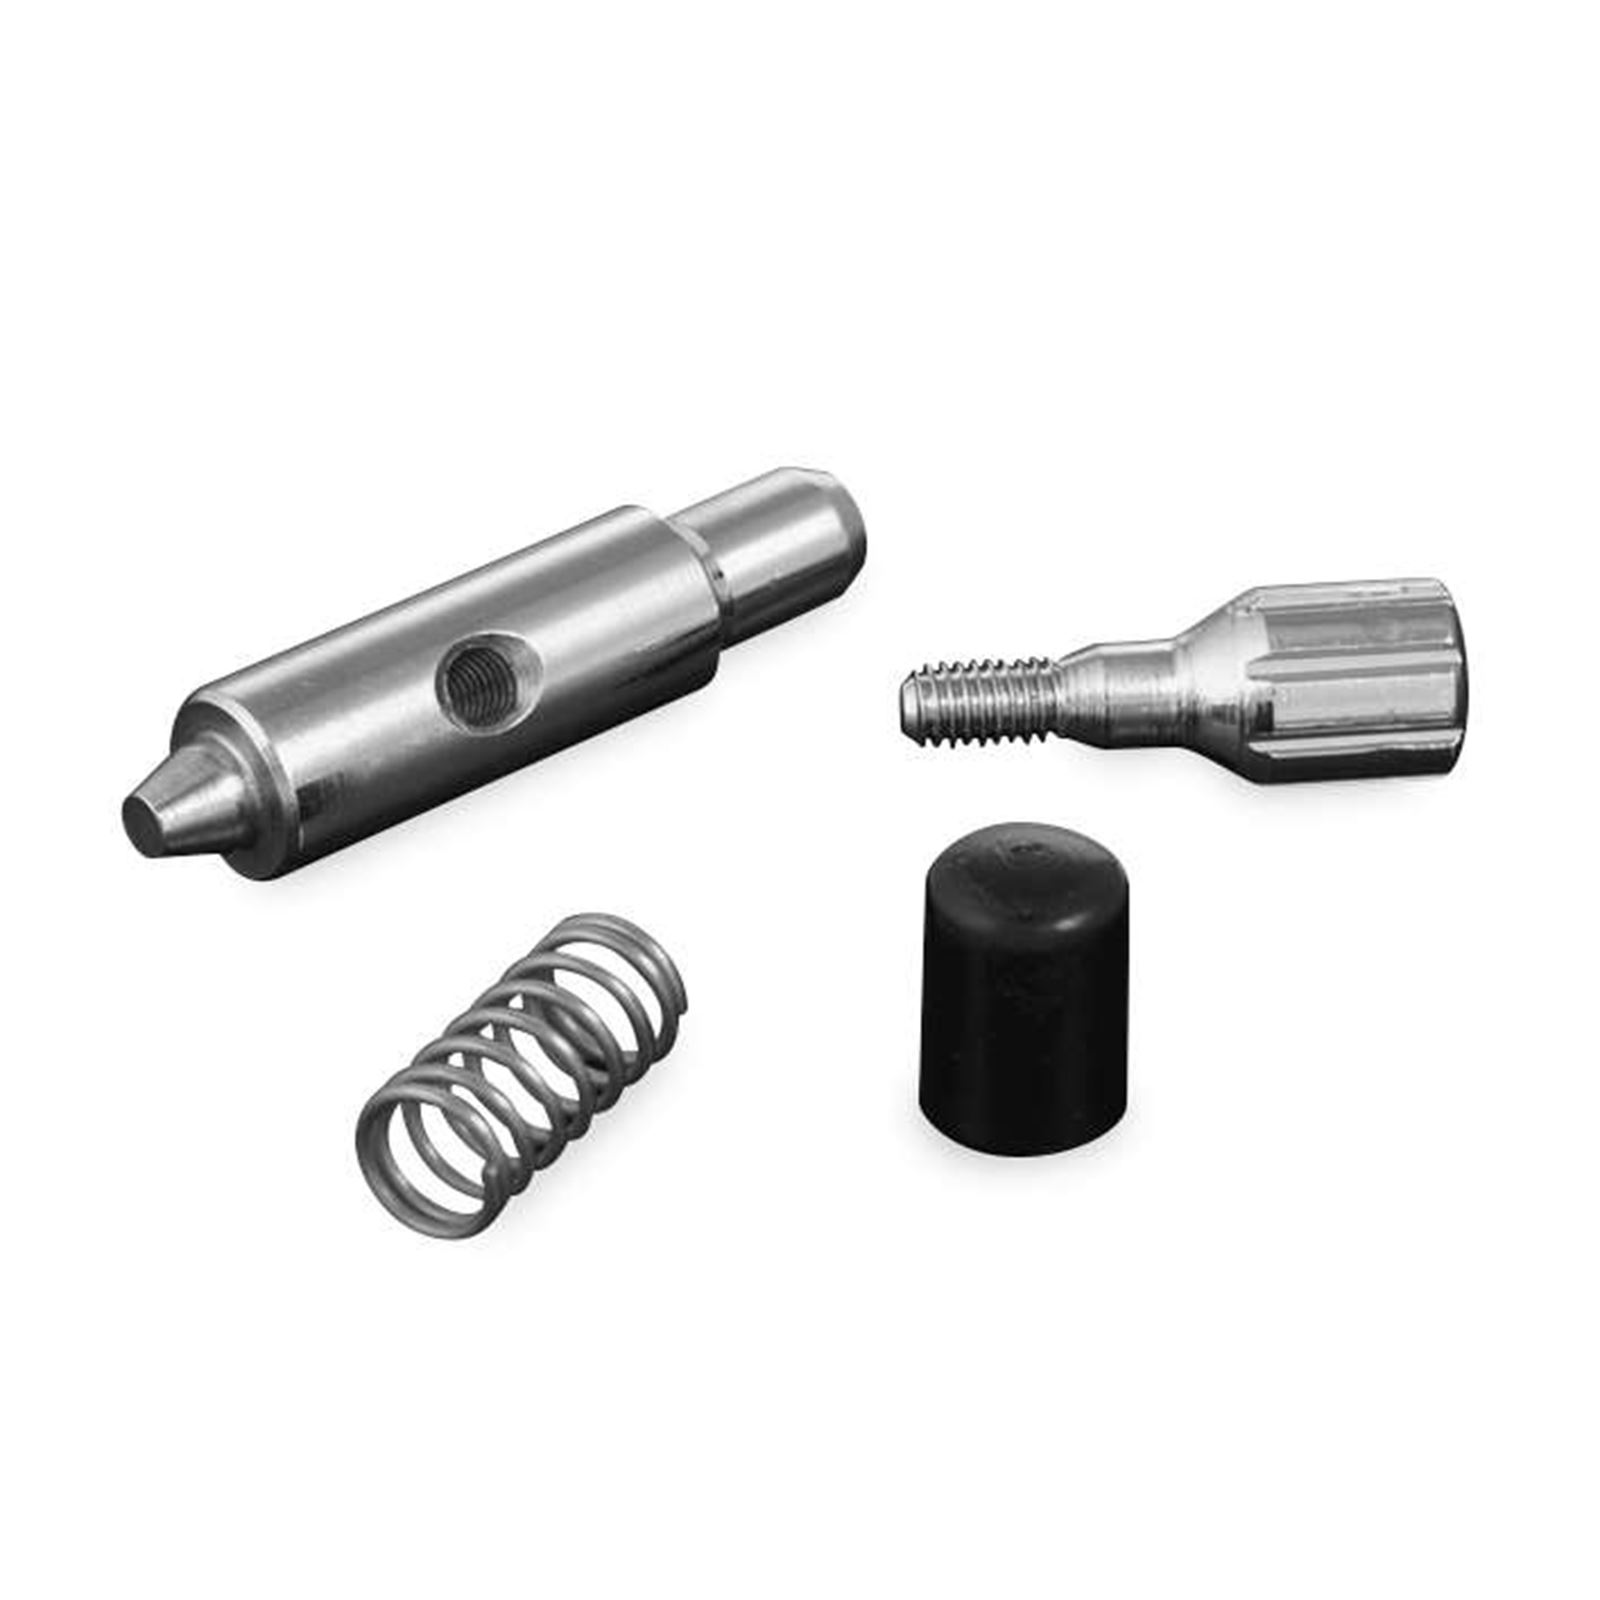 Kuryakyn Replacement Knob And Spring For Adjustable Passenger Pegs